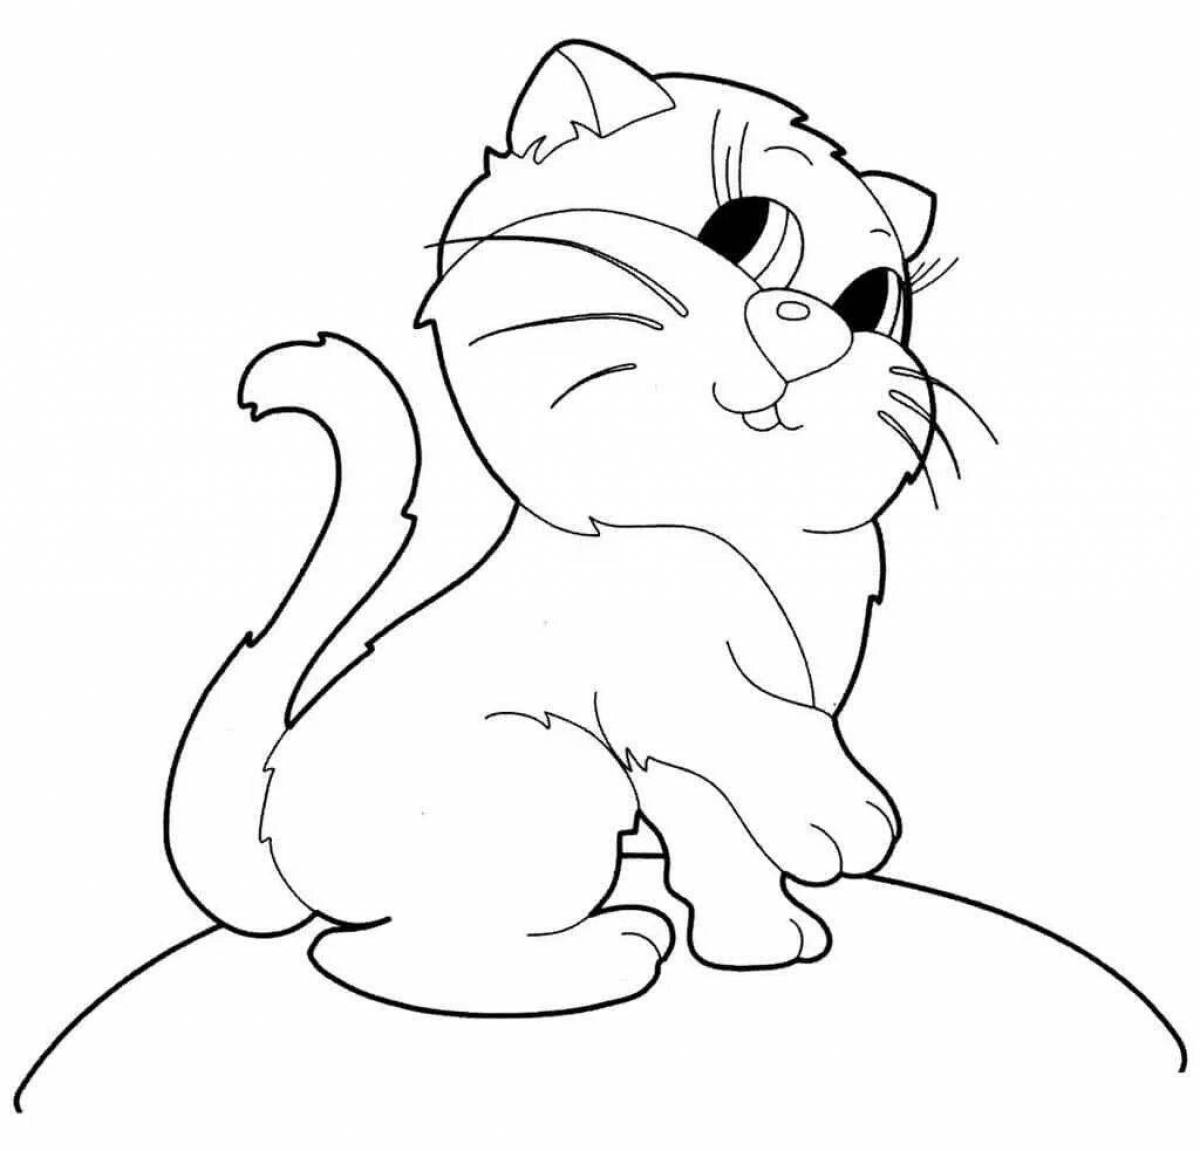 Coloring page cute fold cat